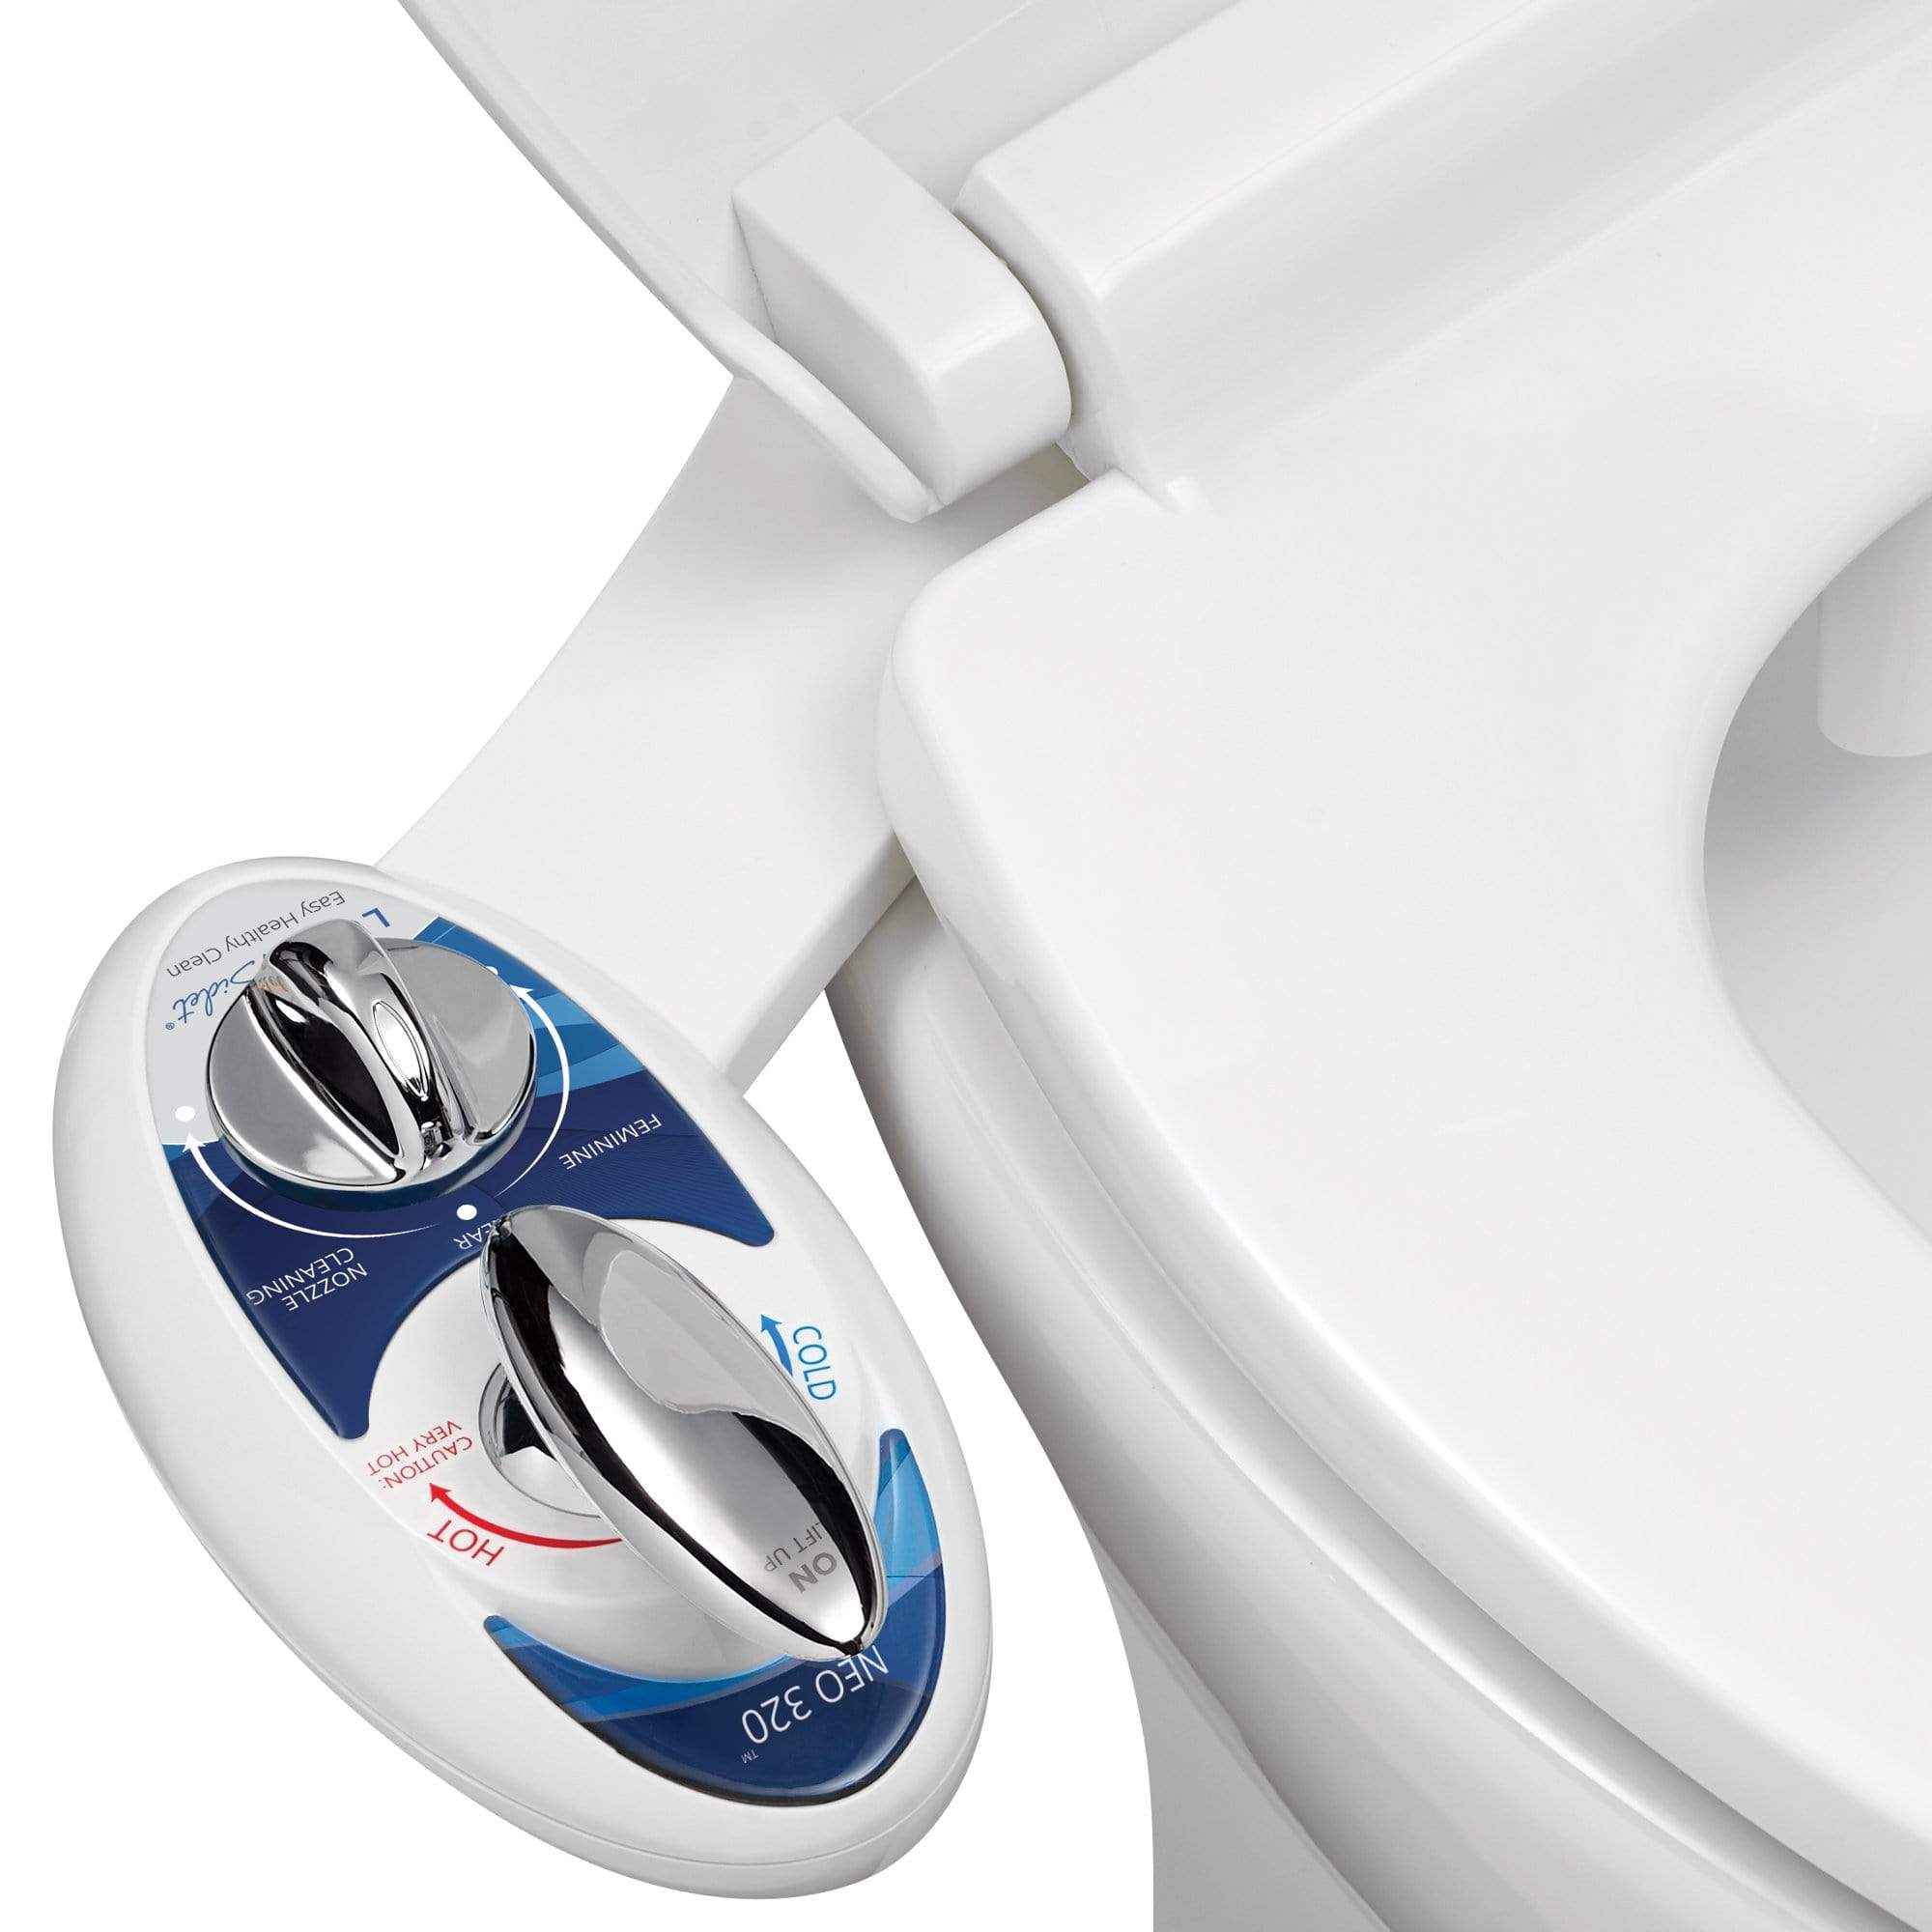 NEO 320: Imperfect Packaging - NEO 320 Blue installed on a toilet, open lid